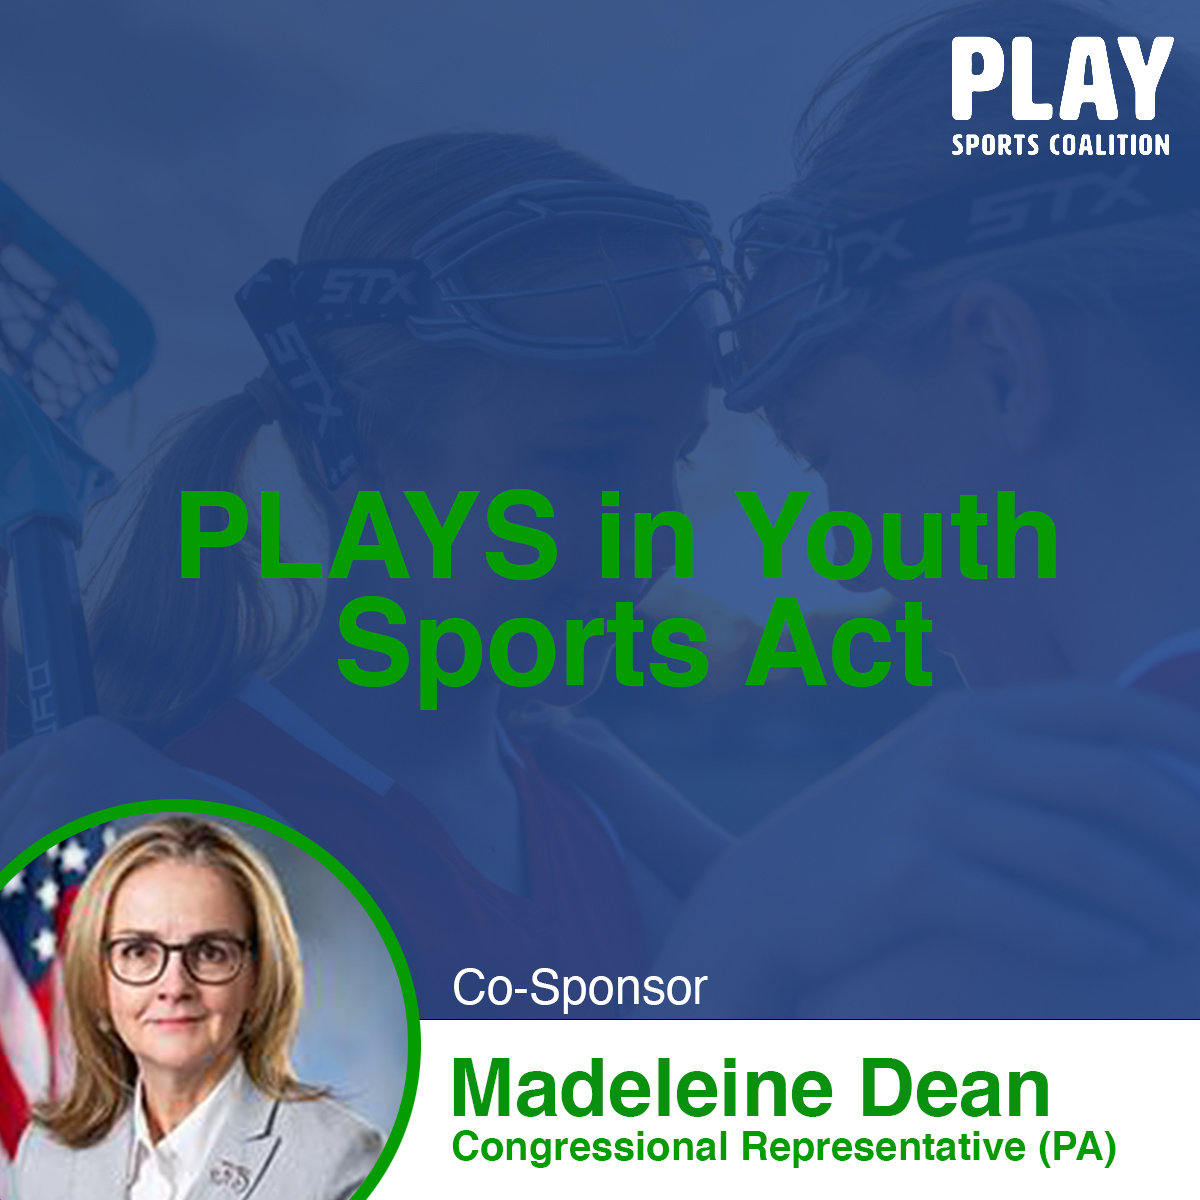 Thank you Congresswoman Madeleine Dean (PA) (@RepDean) for Co-Sponsoring the PLAYS in Youth Sports Act! The PLAYS Act will provide a national grant program to youth development programs and help get more kids in the game. #Unite2PLAY